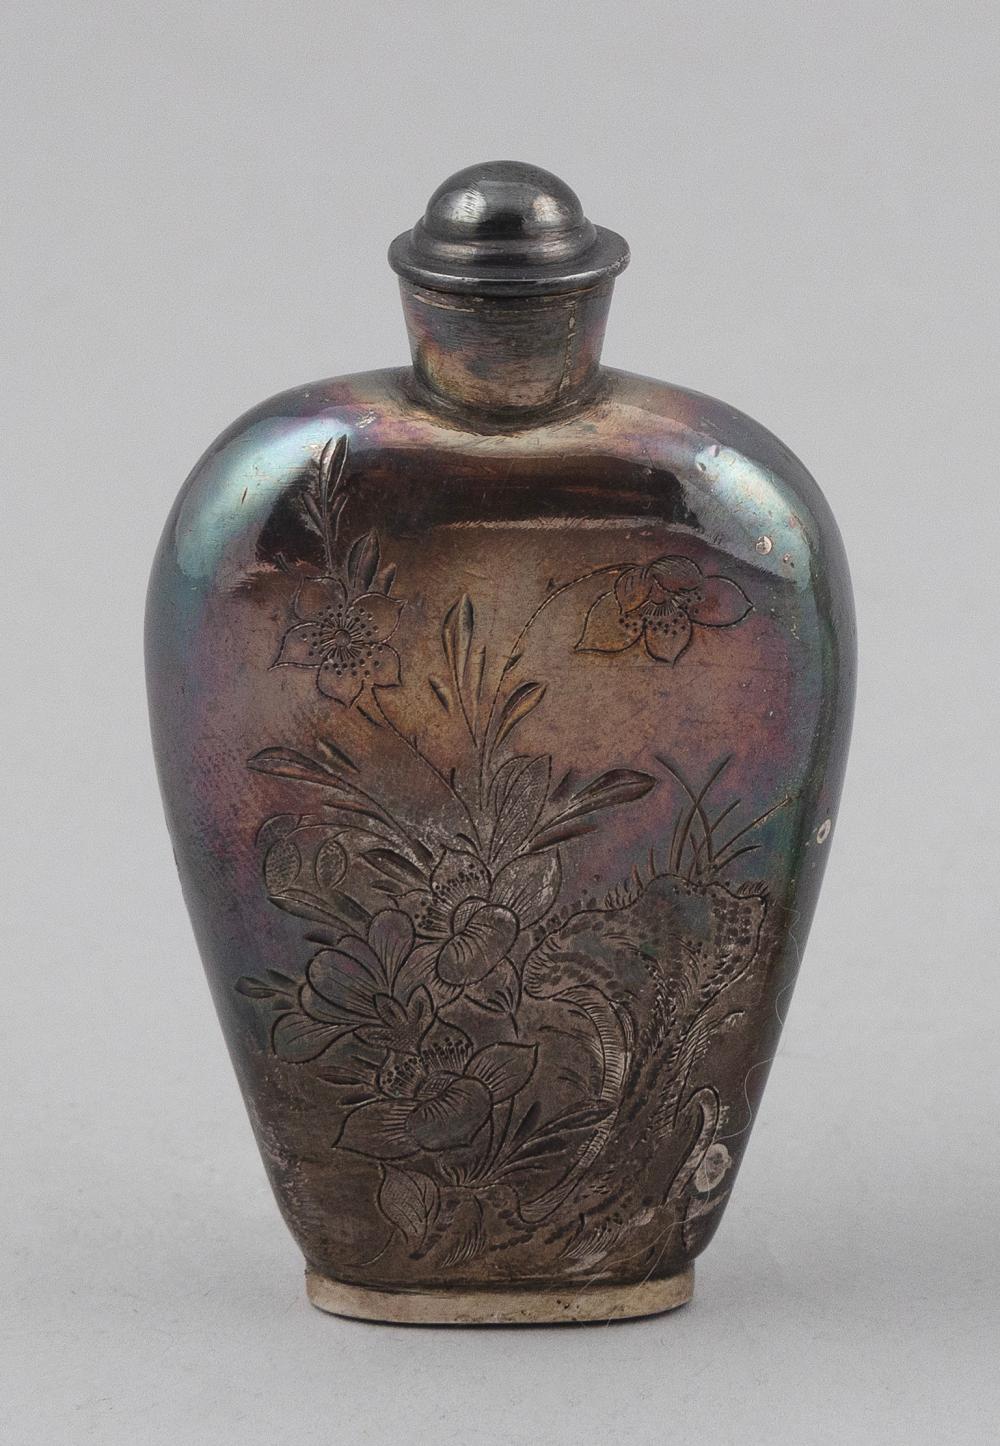 CHINESE ENGRAVED SILVER SNUFF BOTTLE